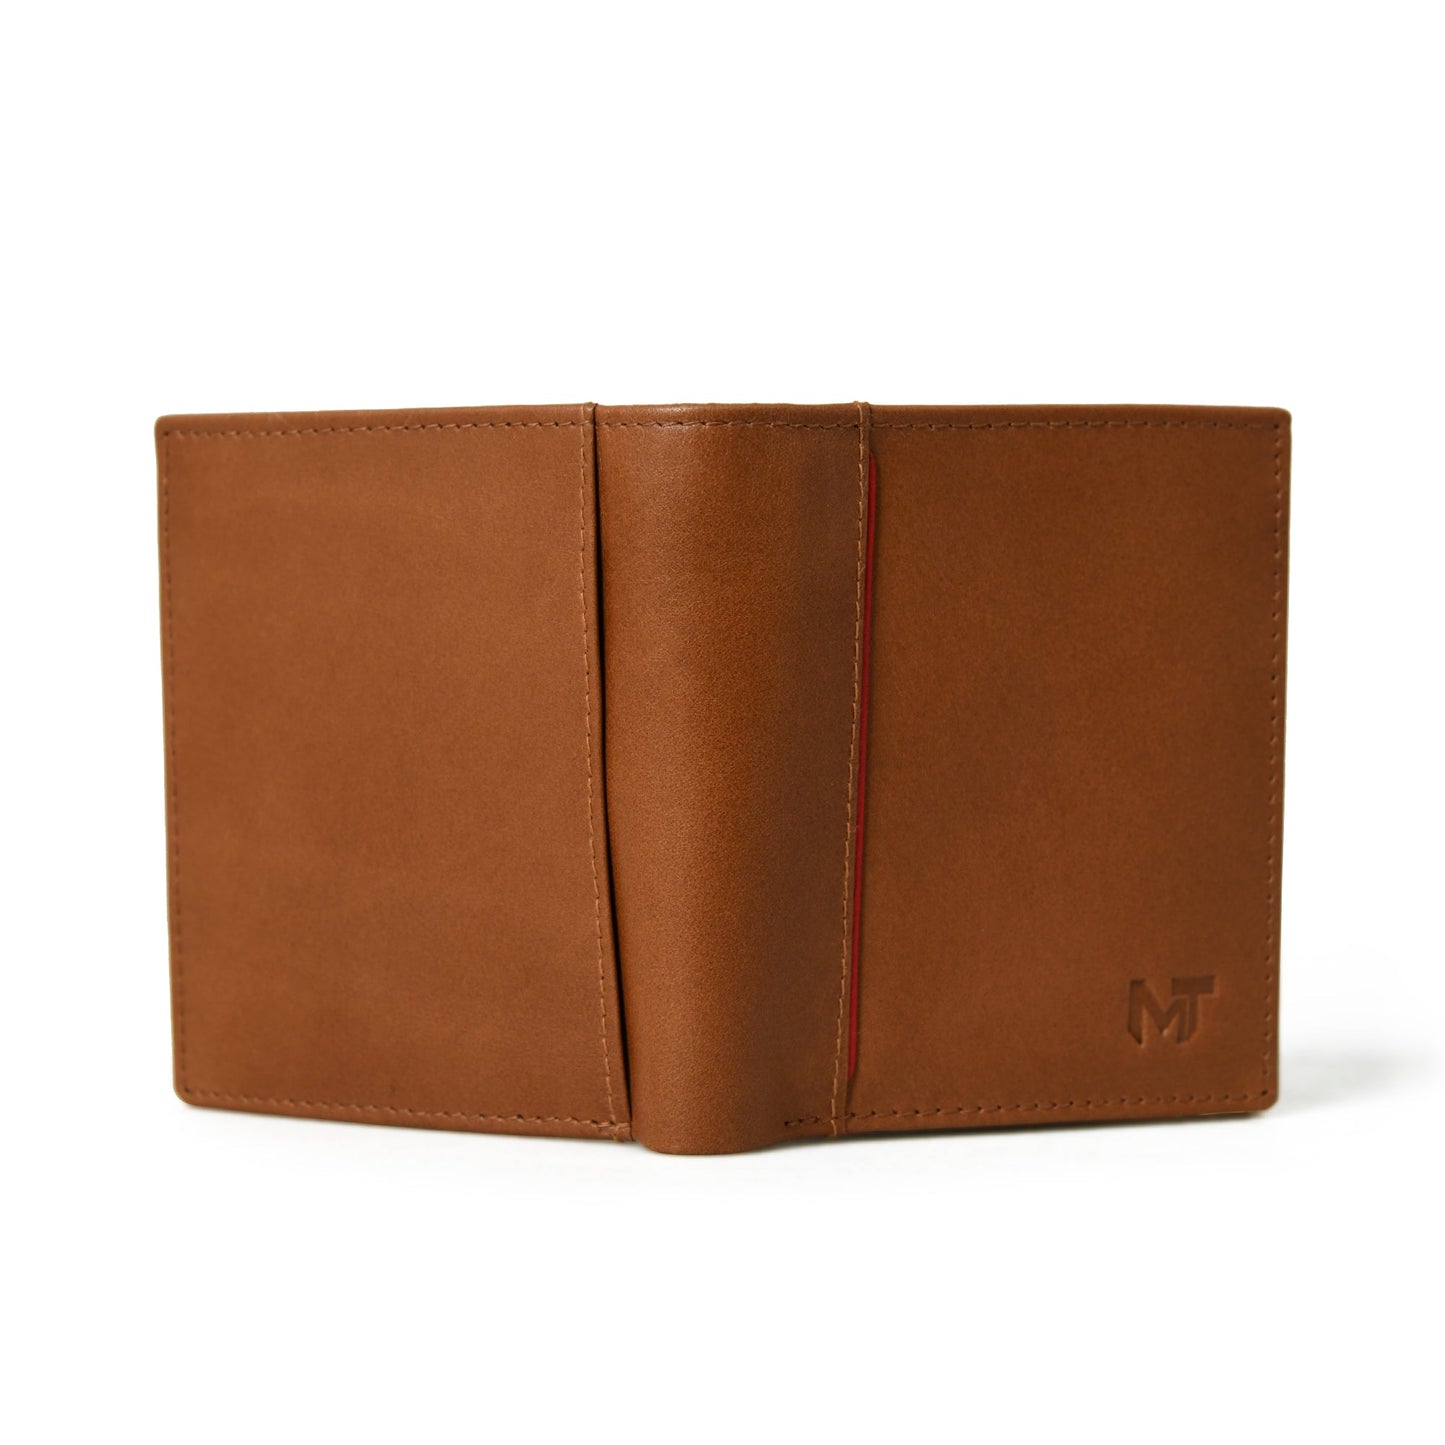 CashCove Wallet - Tan Brown - The Tool Store